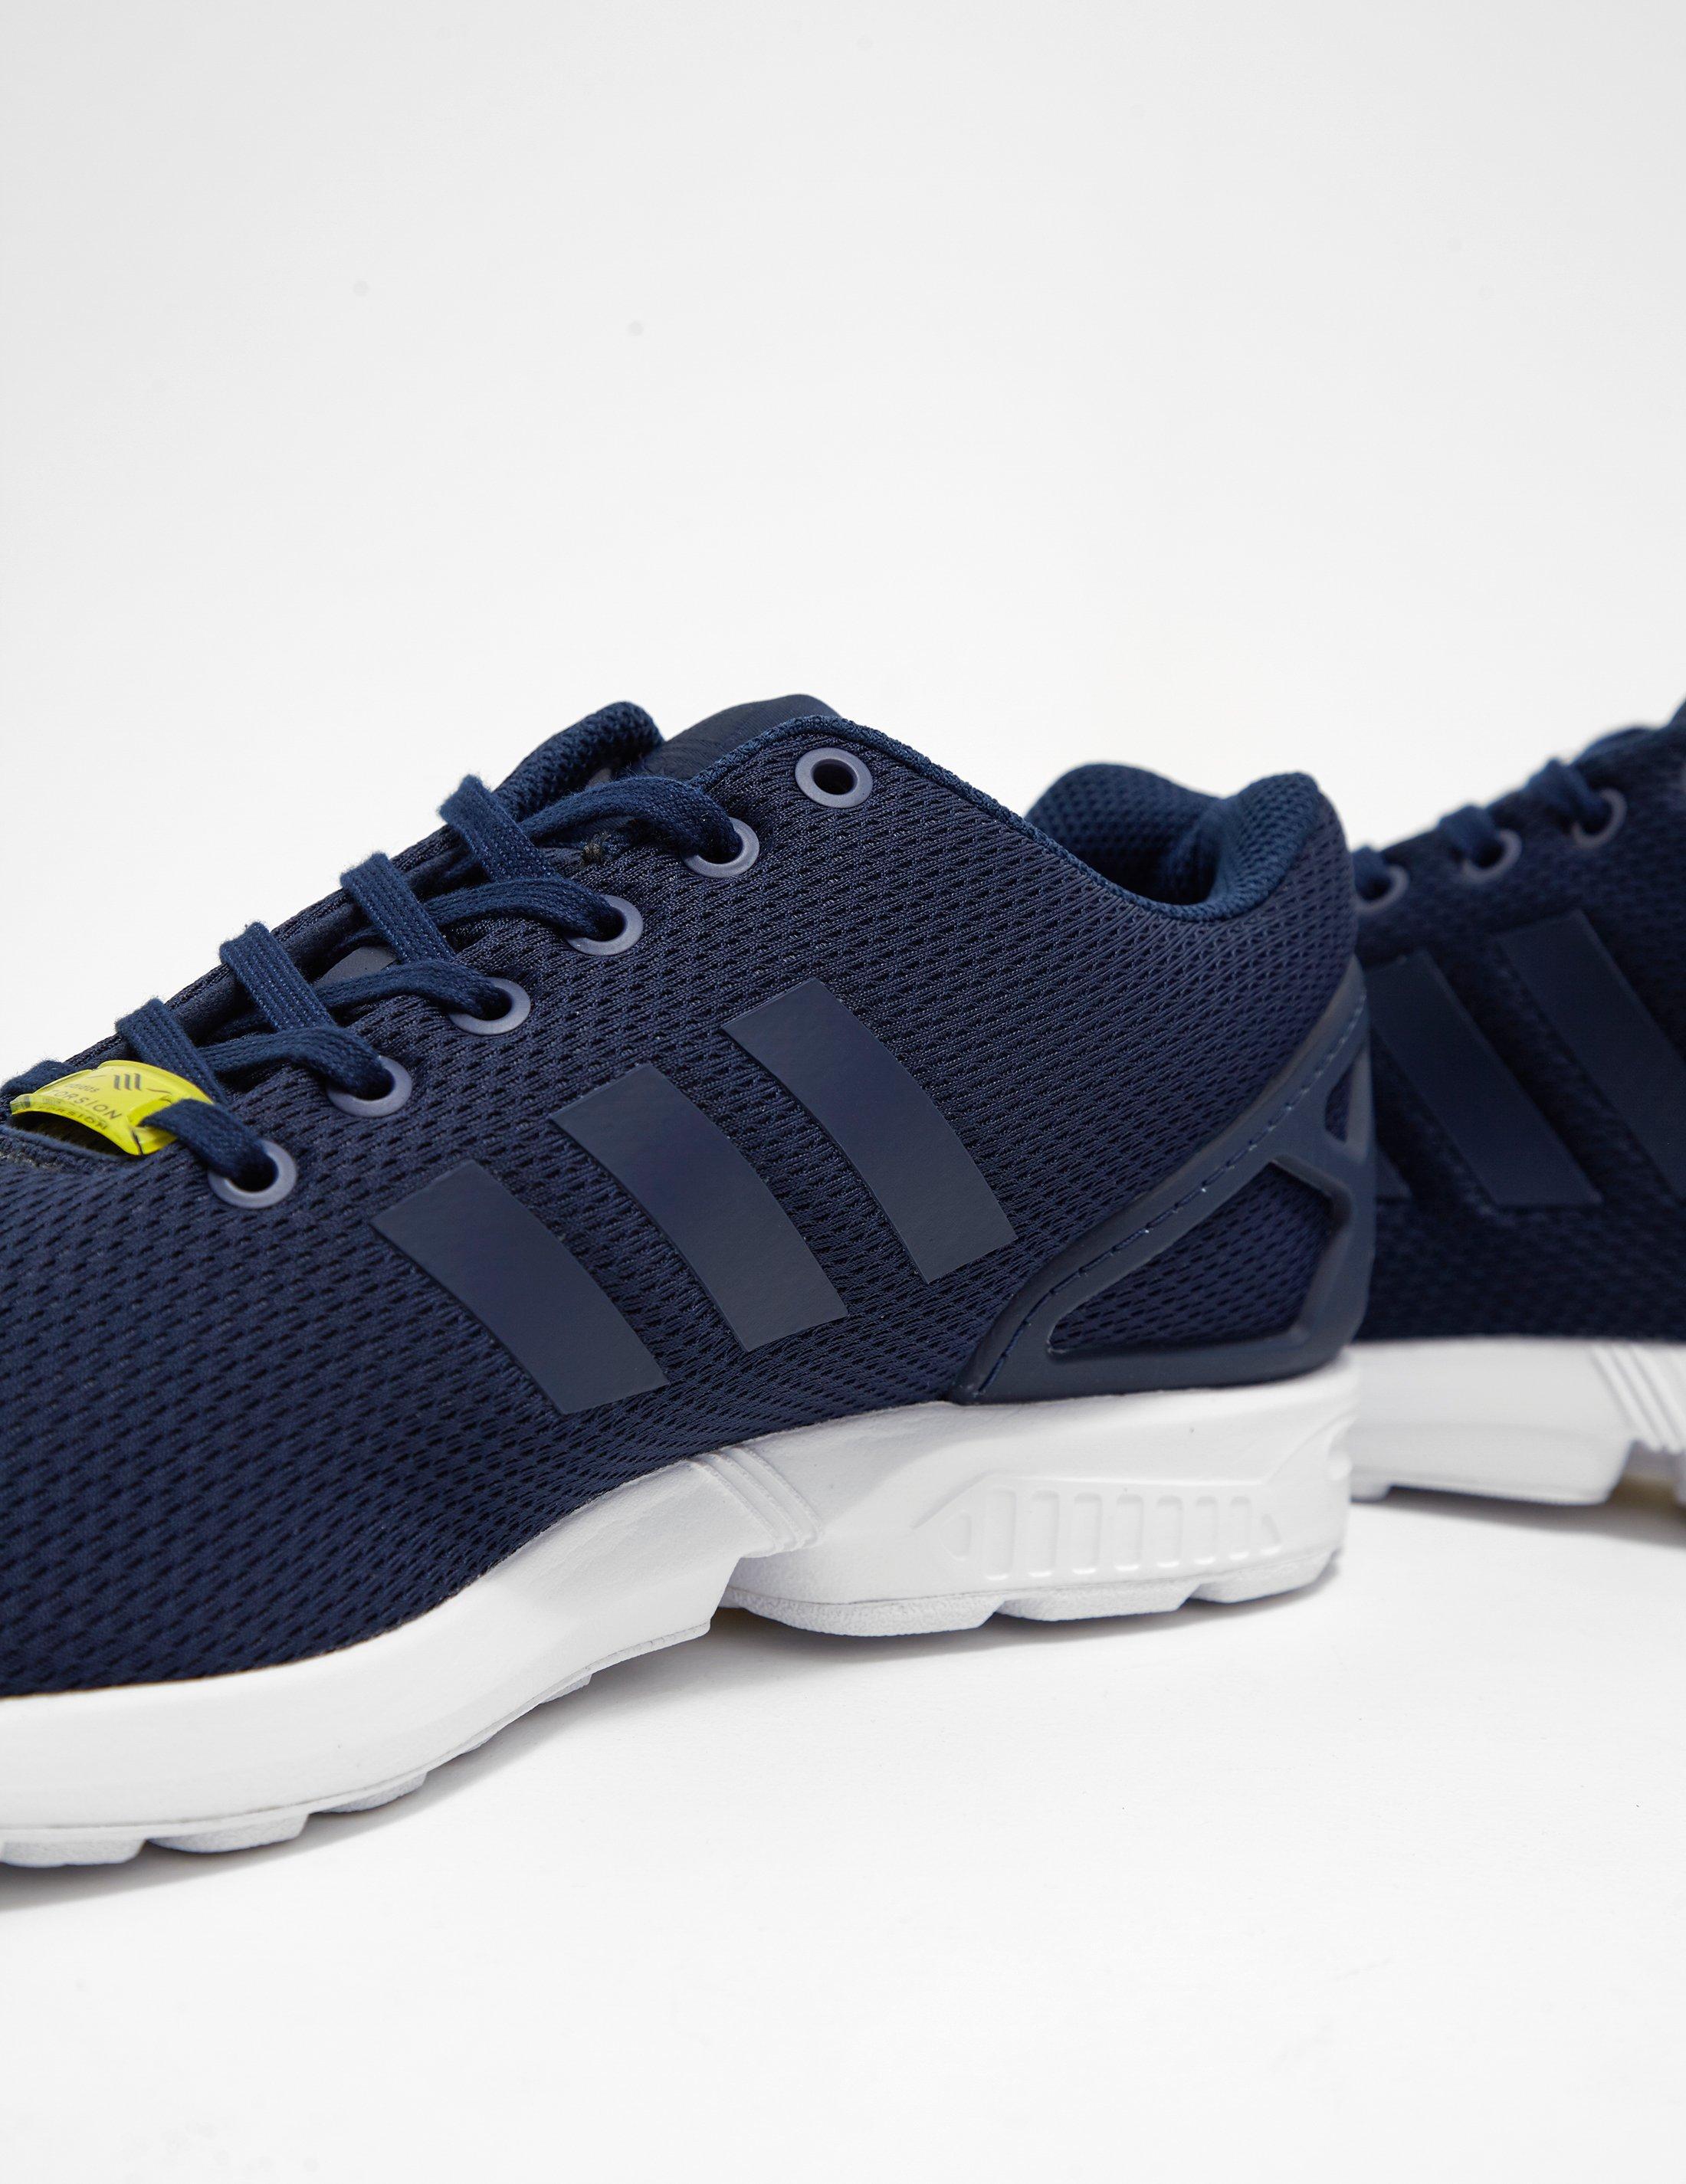 adidas flux navy and white